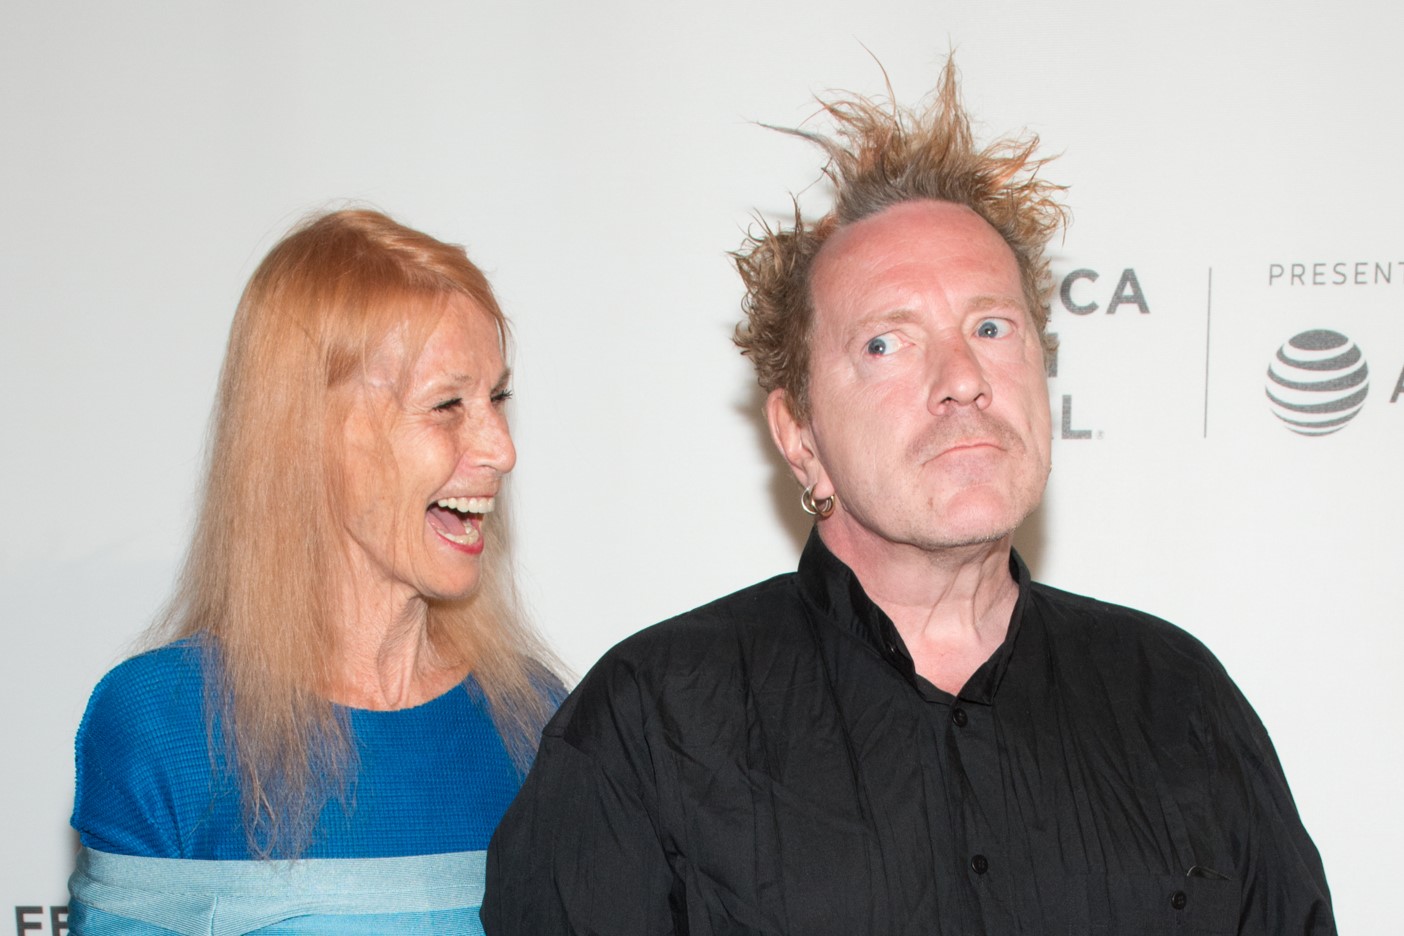 John Lydon's Wife Nora Forster Dead at 80: Cause of Death Revealed